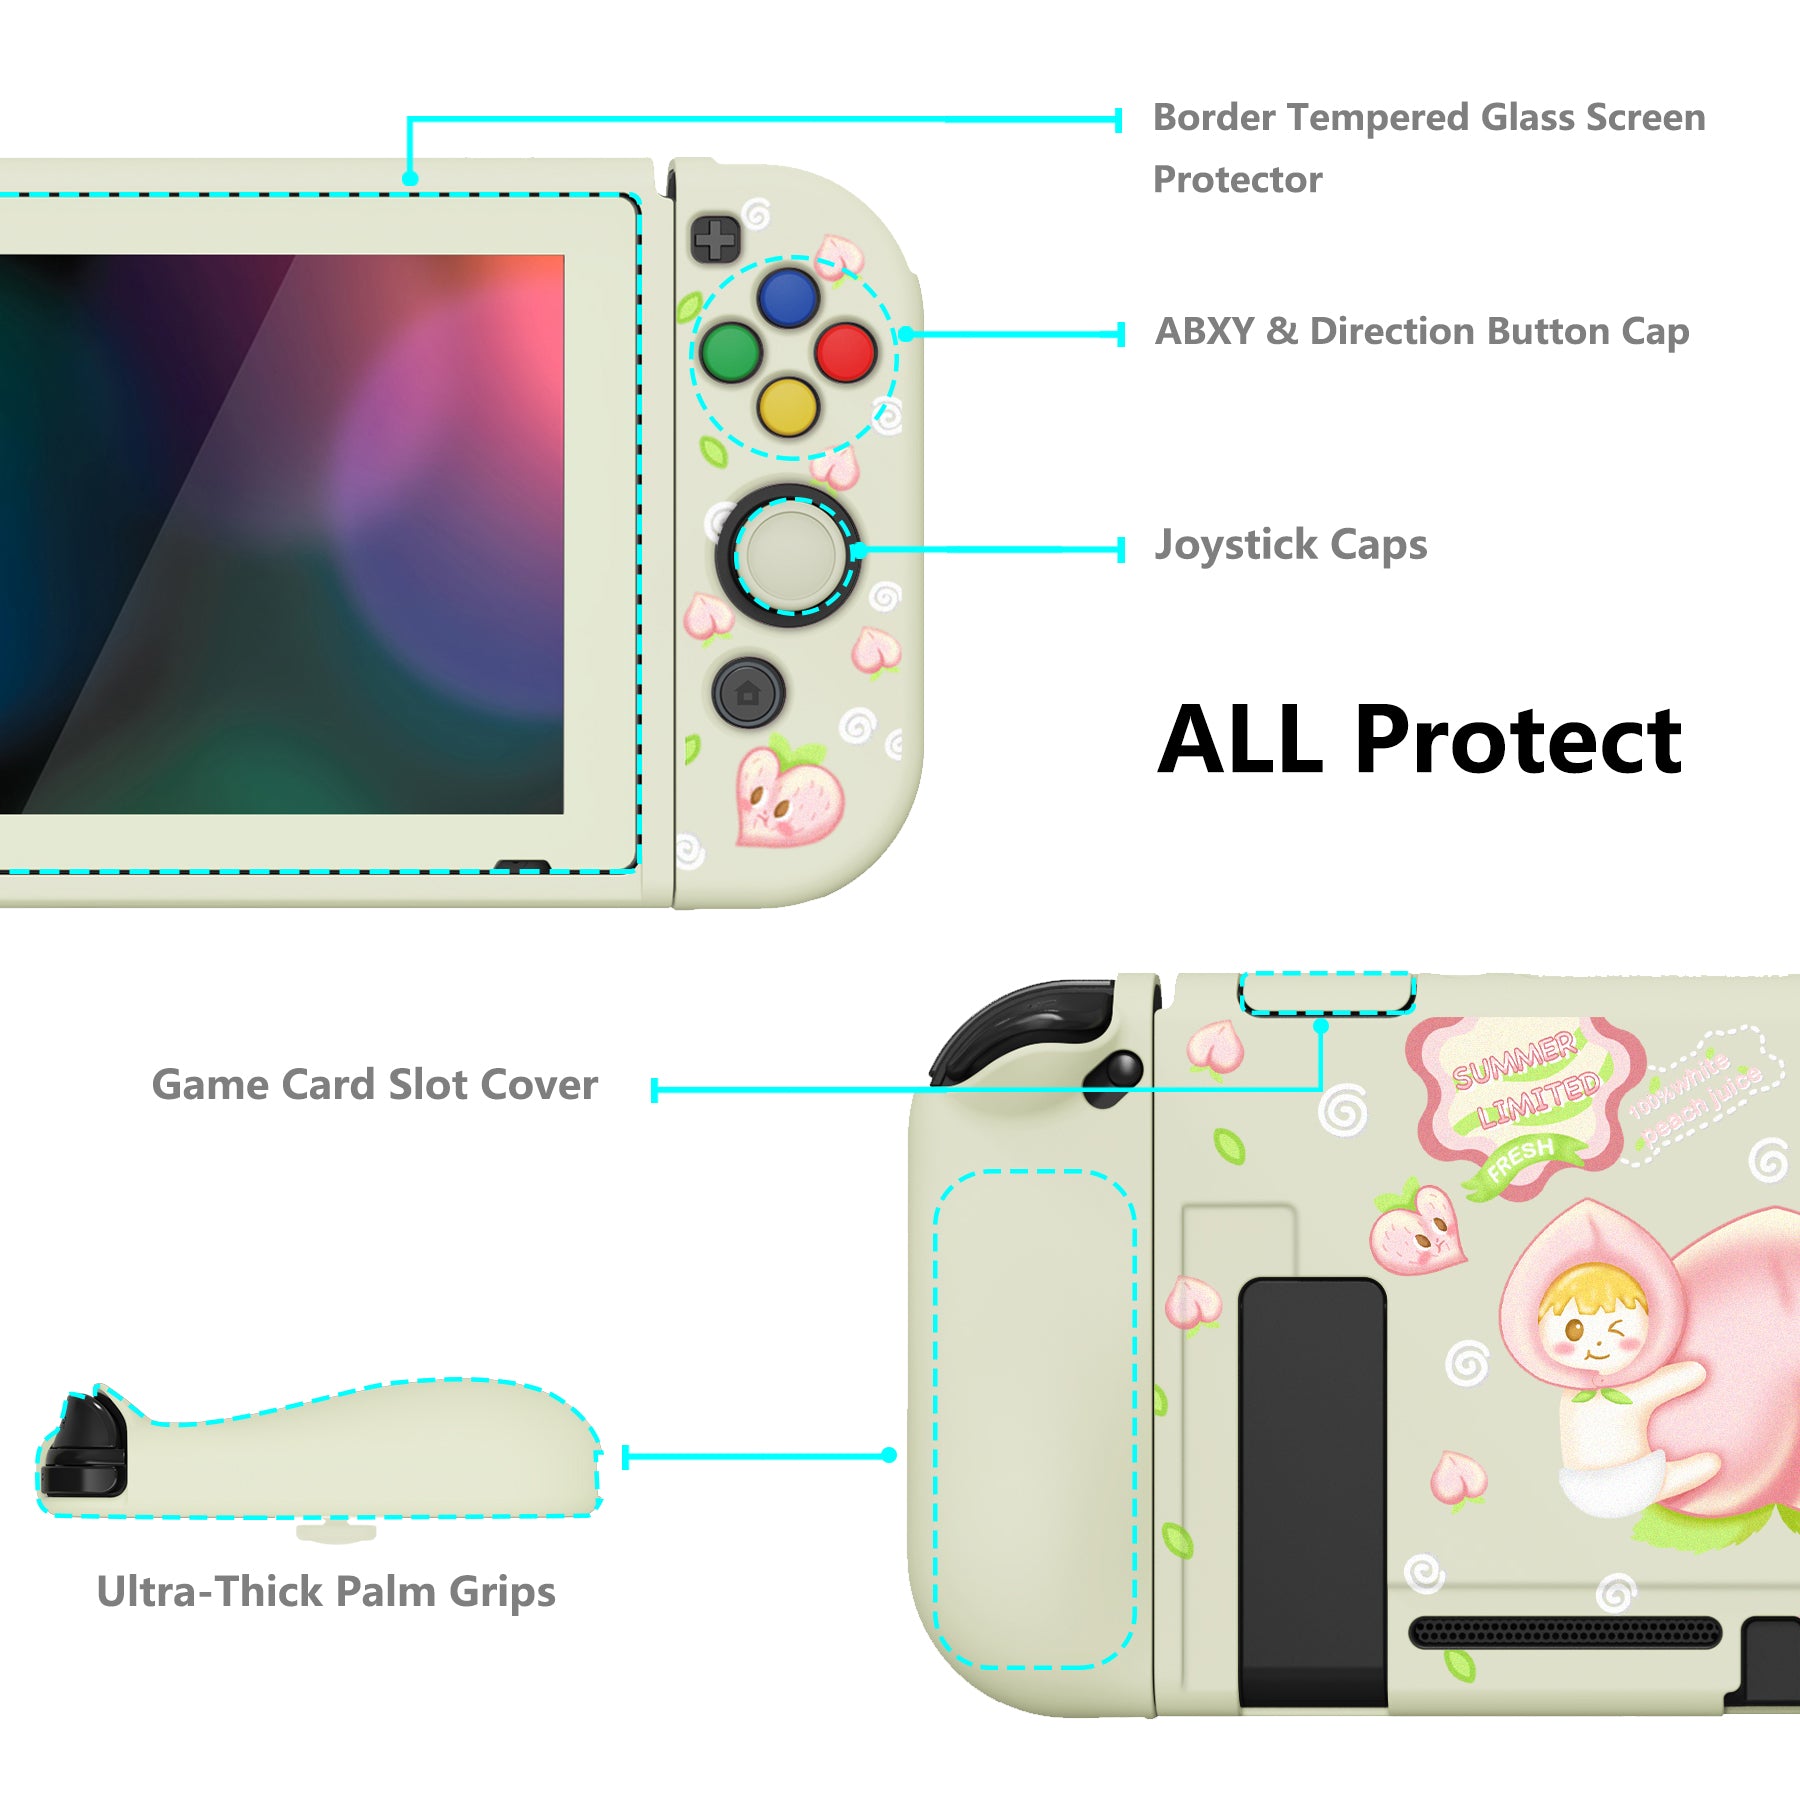 PlayVital ZealProtect Soft Protective Case for Nintendo Switch, Flexible Cover for Switch with Tempered Glass Screen Protector & Thumb Grips & ABXY Direction Button Caps - Summer Peaches - RNSYV6015 playvital